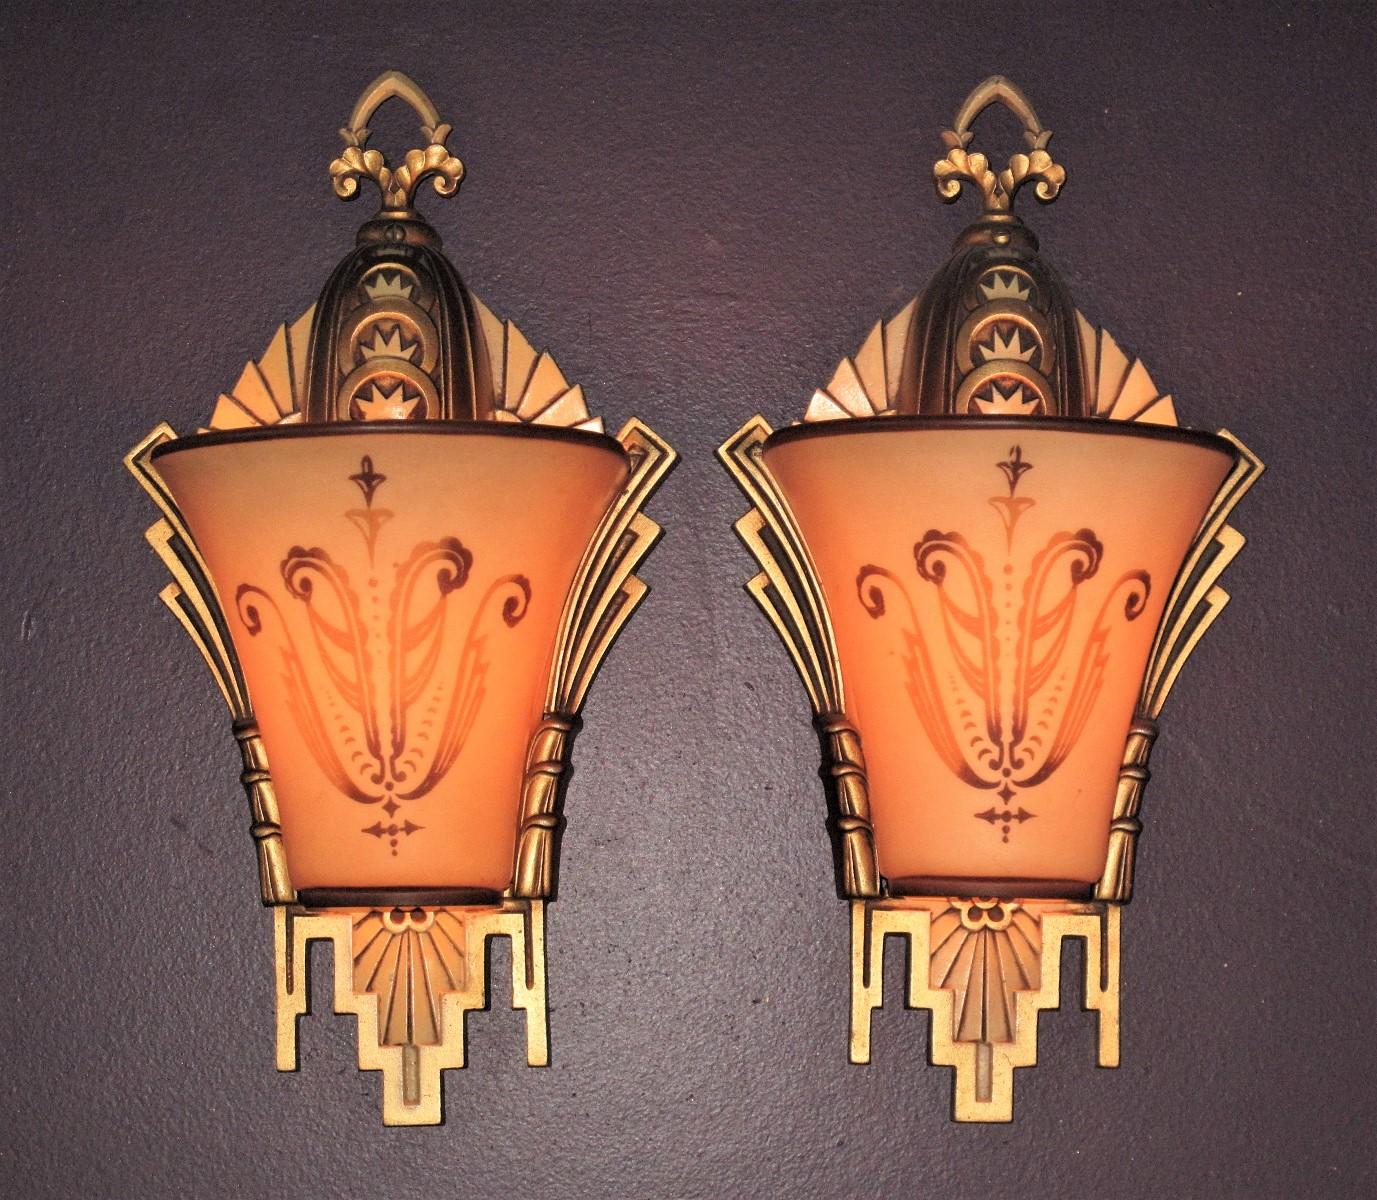 One of the more elegant and sophisticated sconce designs from the well respected lighting firm of Williamson of Chicago. Art Deco in style yet these have a maturity in design not often seen during that period of the late 1920s. The visual interest